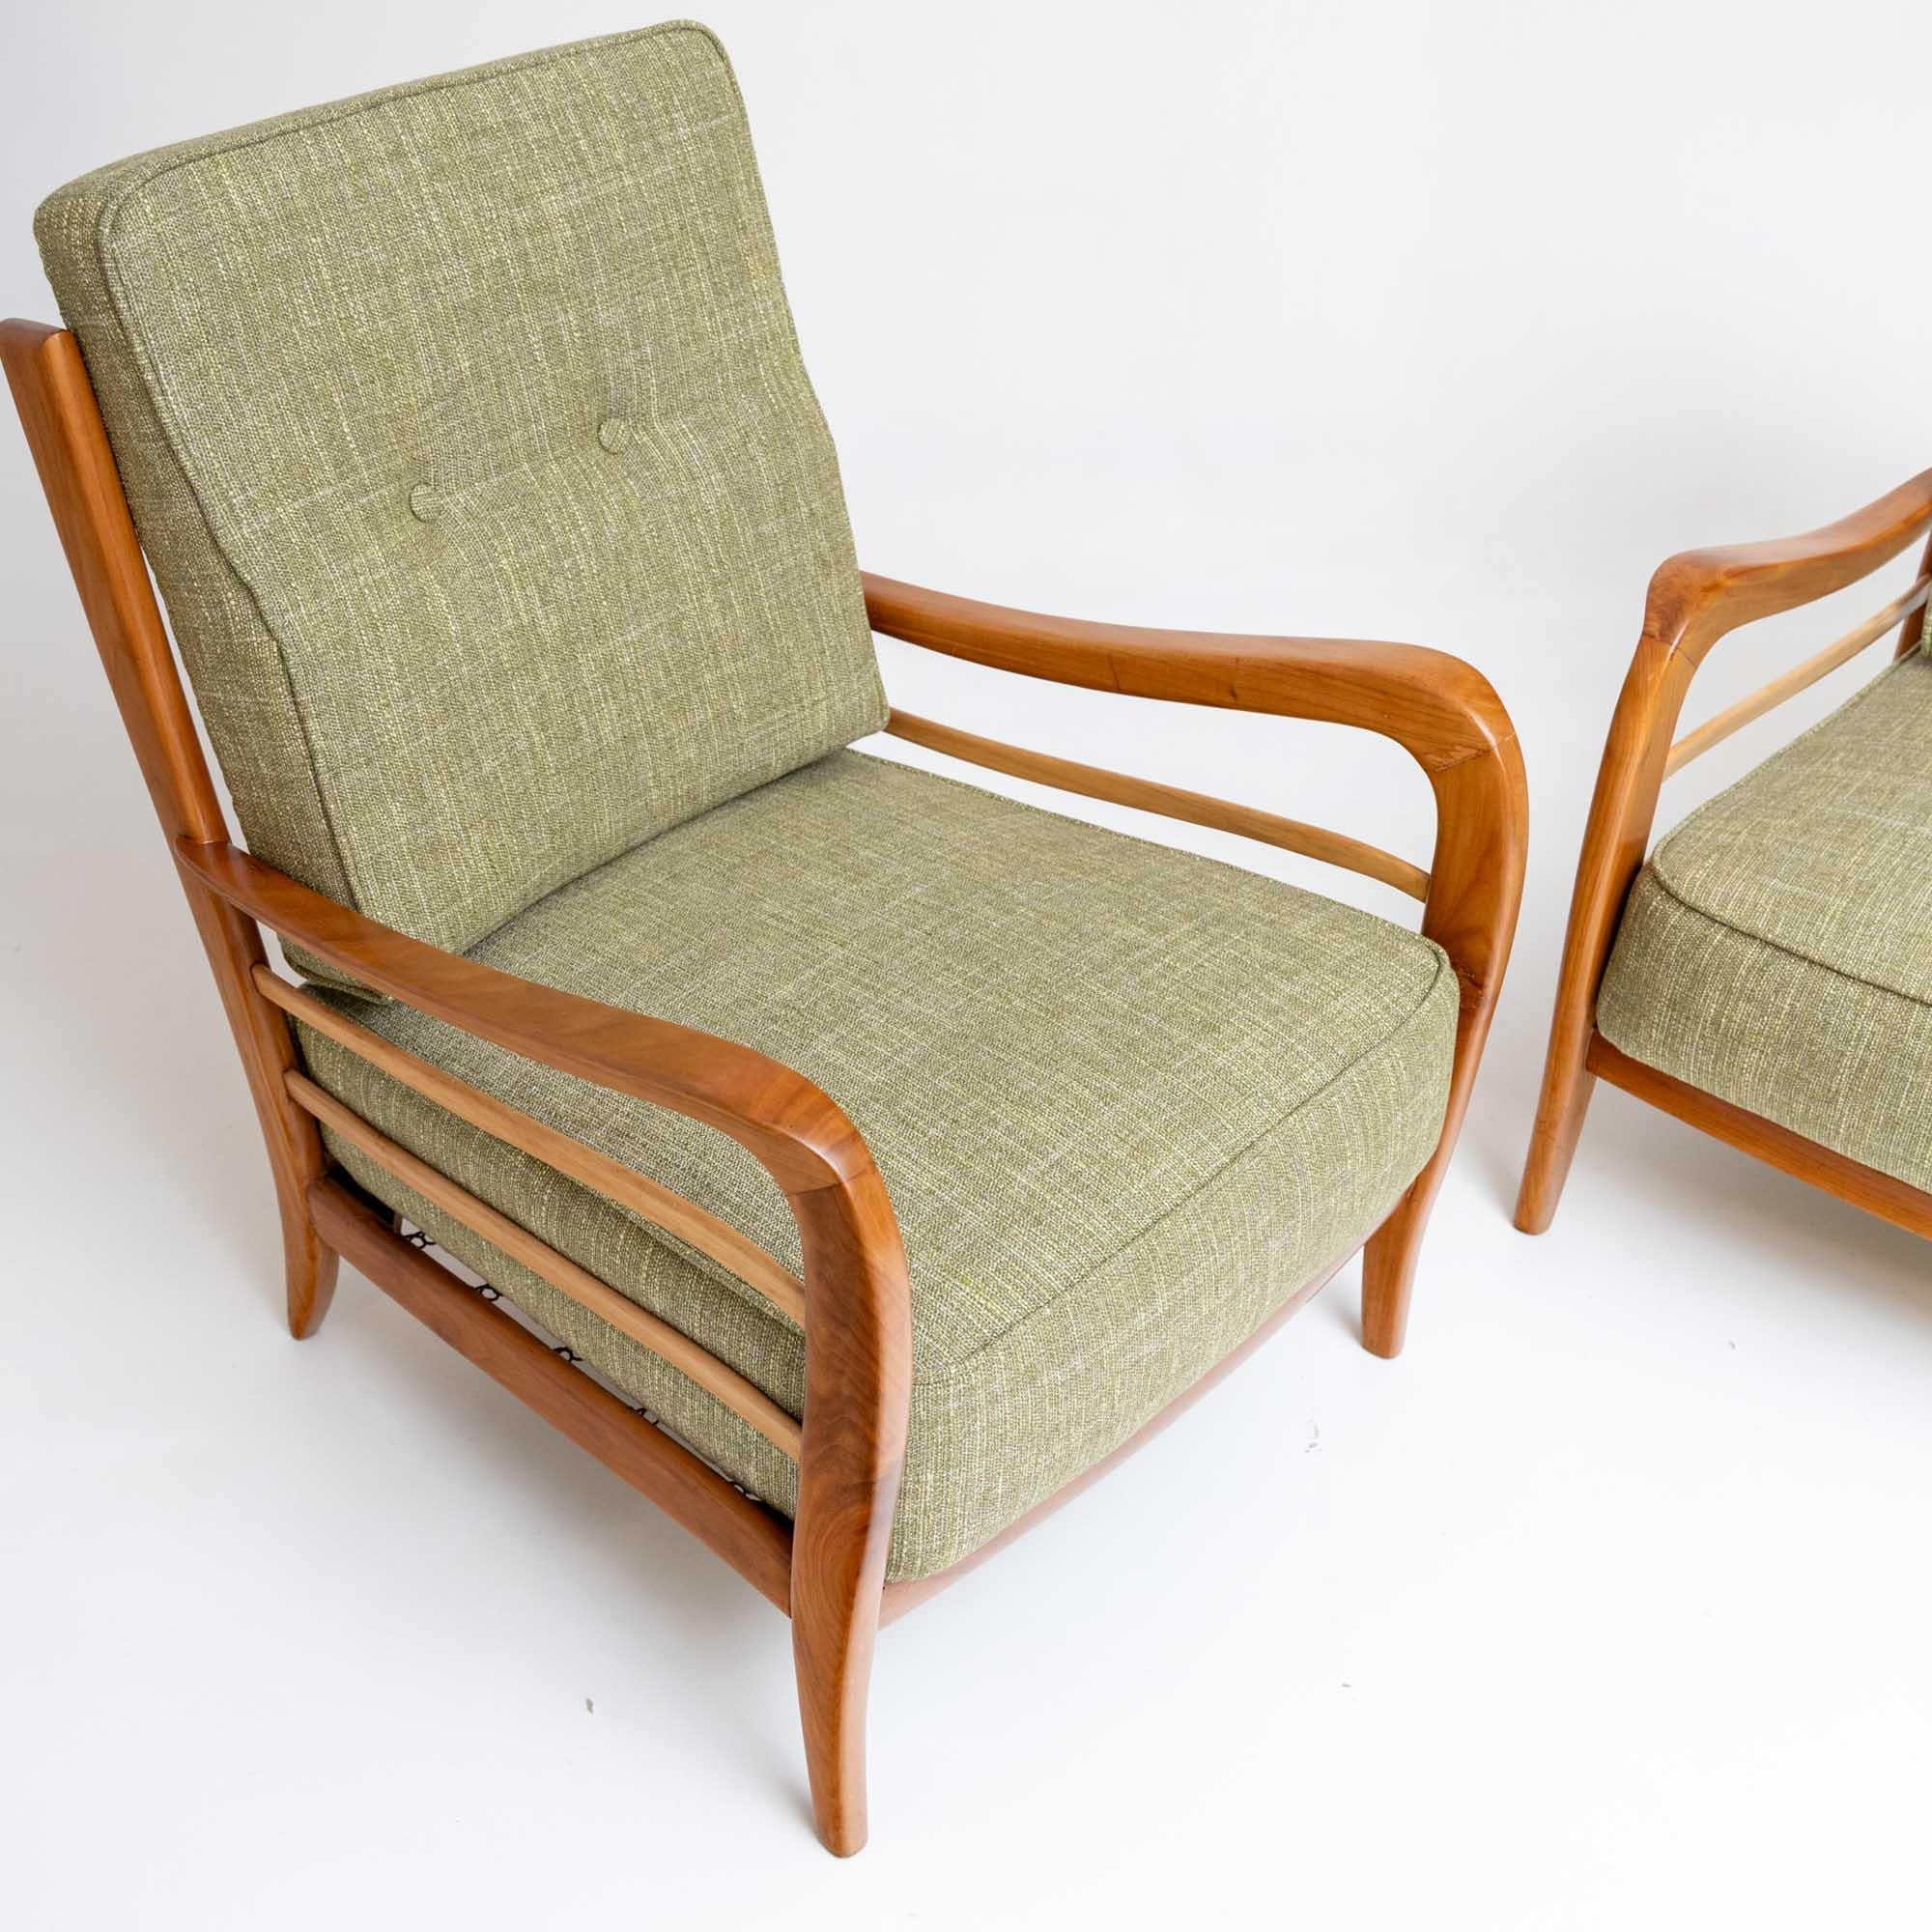 Mid-20th Century Pair of Lounge Chairs in Cherry, green Upholstery attr. Paolo Buffa, Italy 1950s For Sale